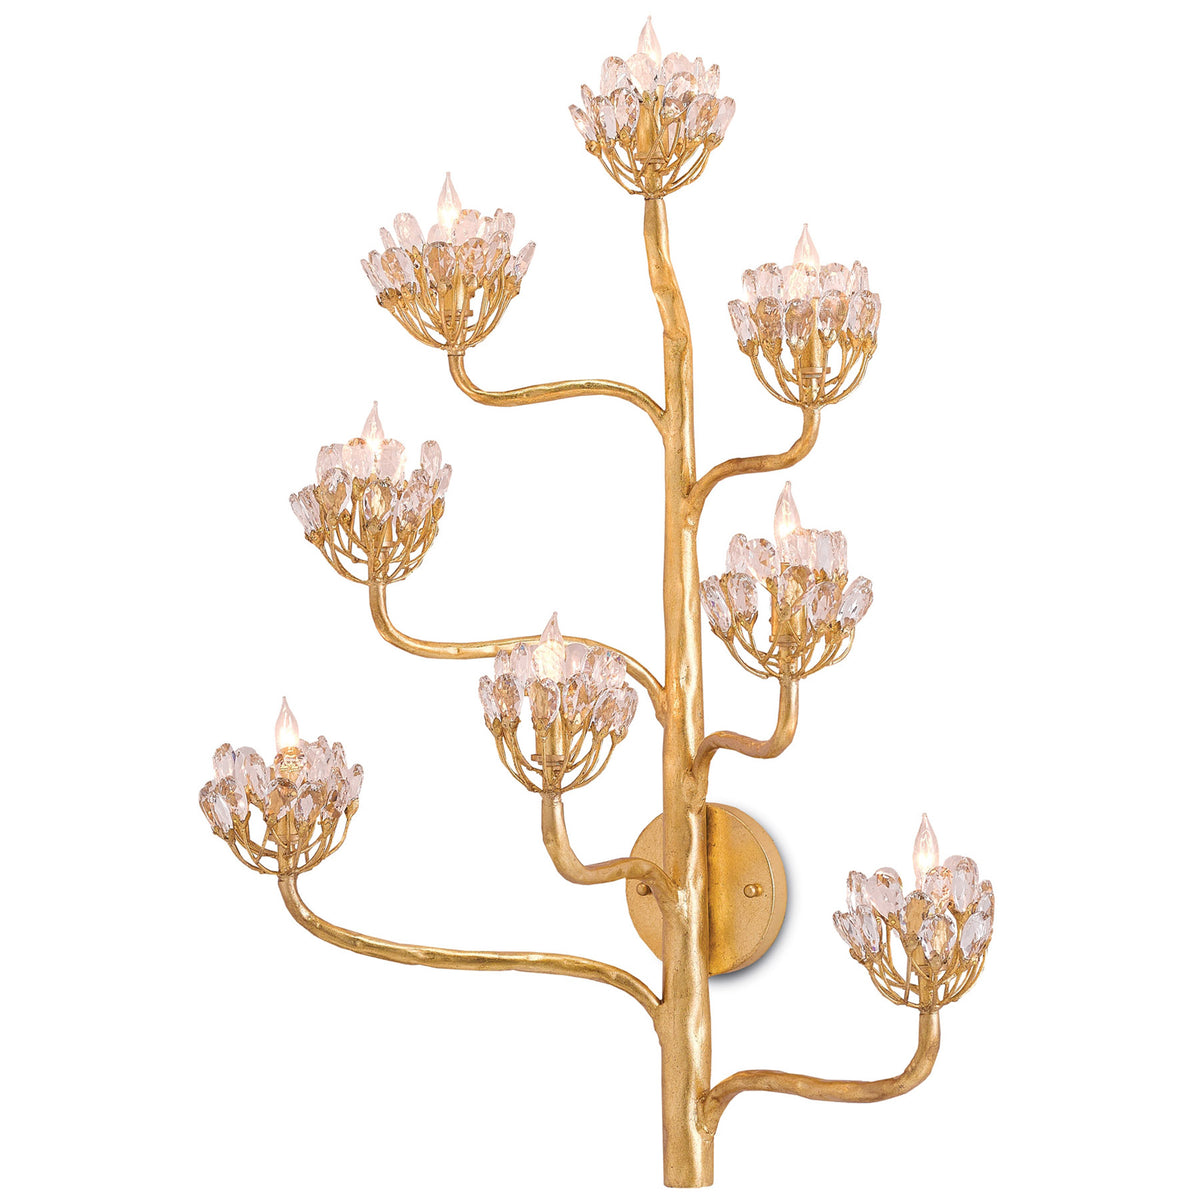 Agave Americana Gold Wall Sconce